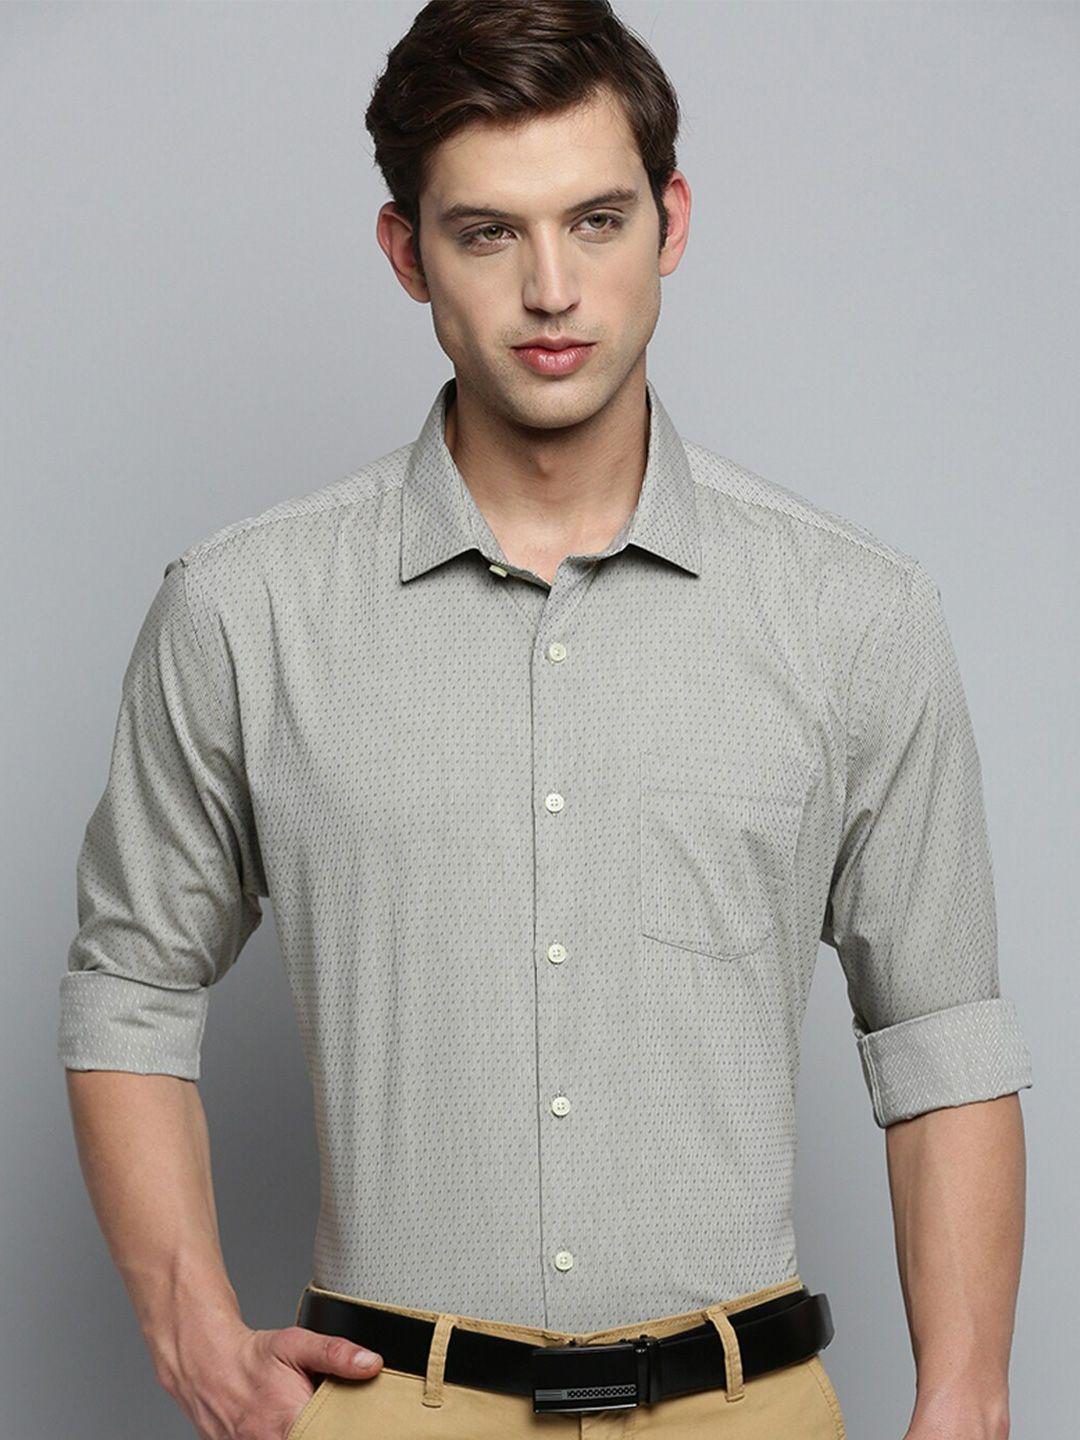 showoff classic vertical striped formal cotton shirt